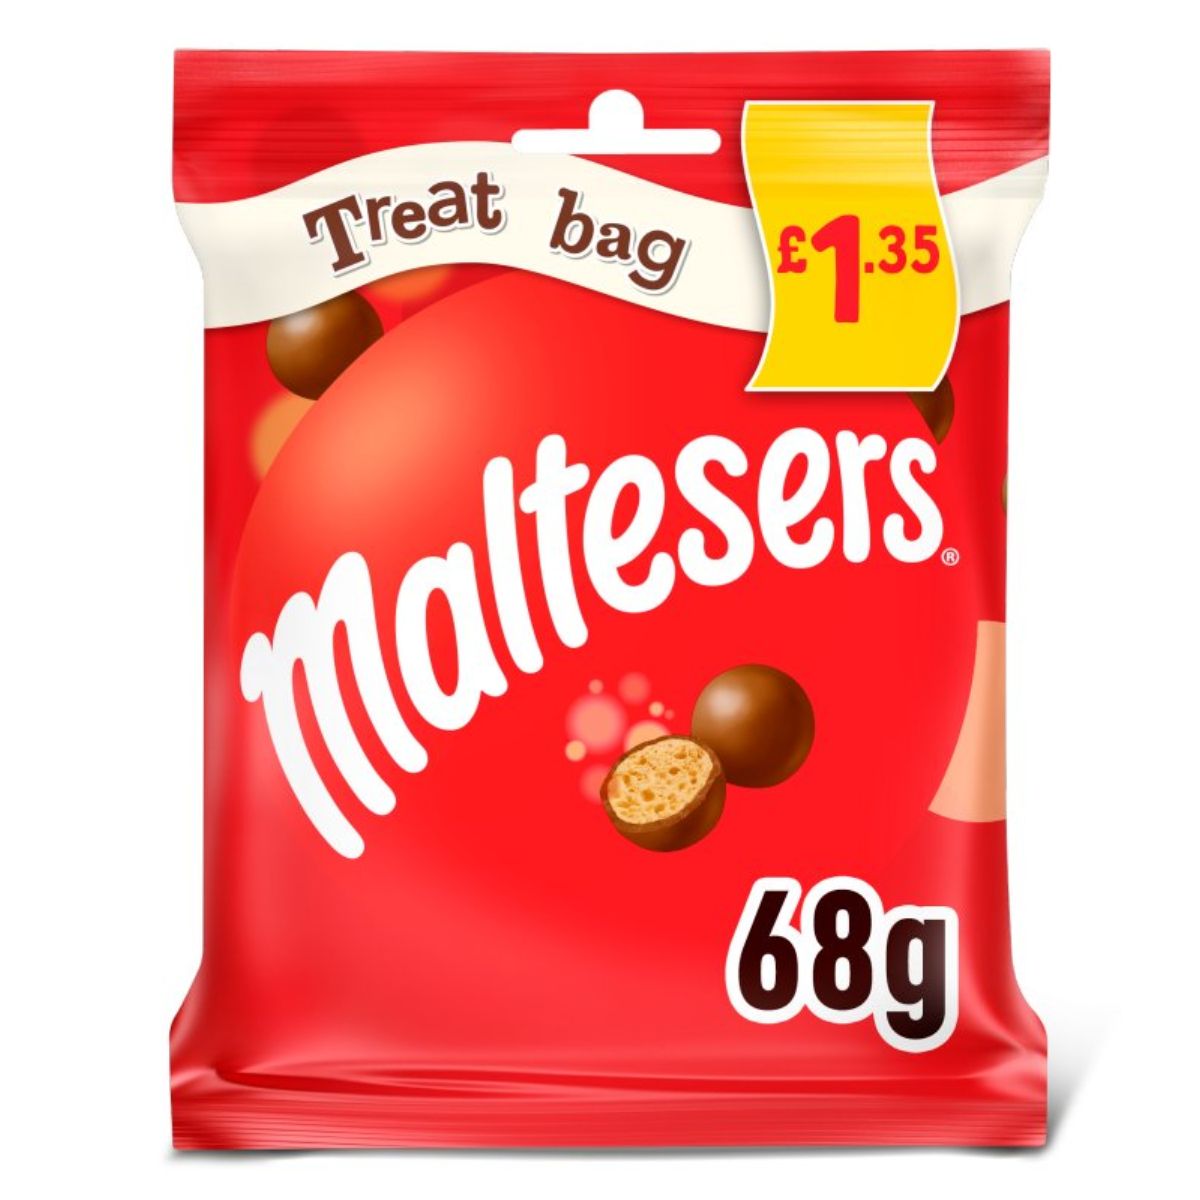 A red Maltesers - Milk Chocolate & Honeycomb Bites Treat Bag, priced at £1.35 and weighing 68 grams, with an image of chocolate-covered malt balls spilling out.